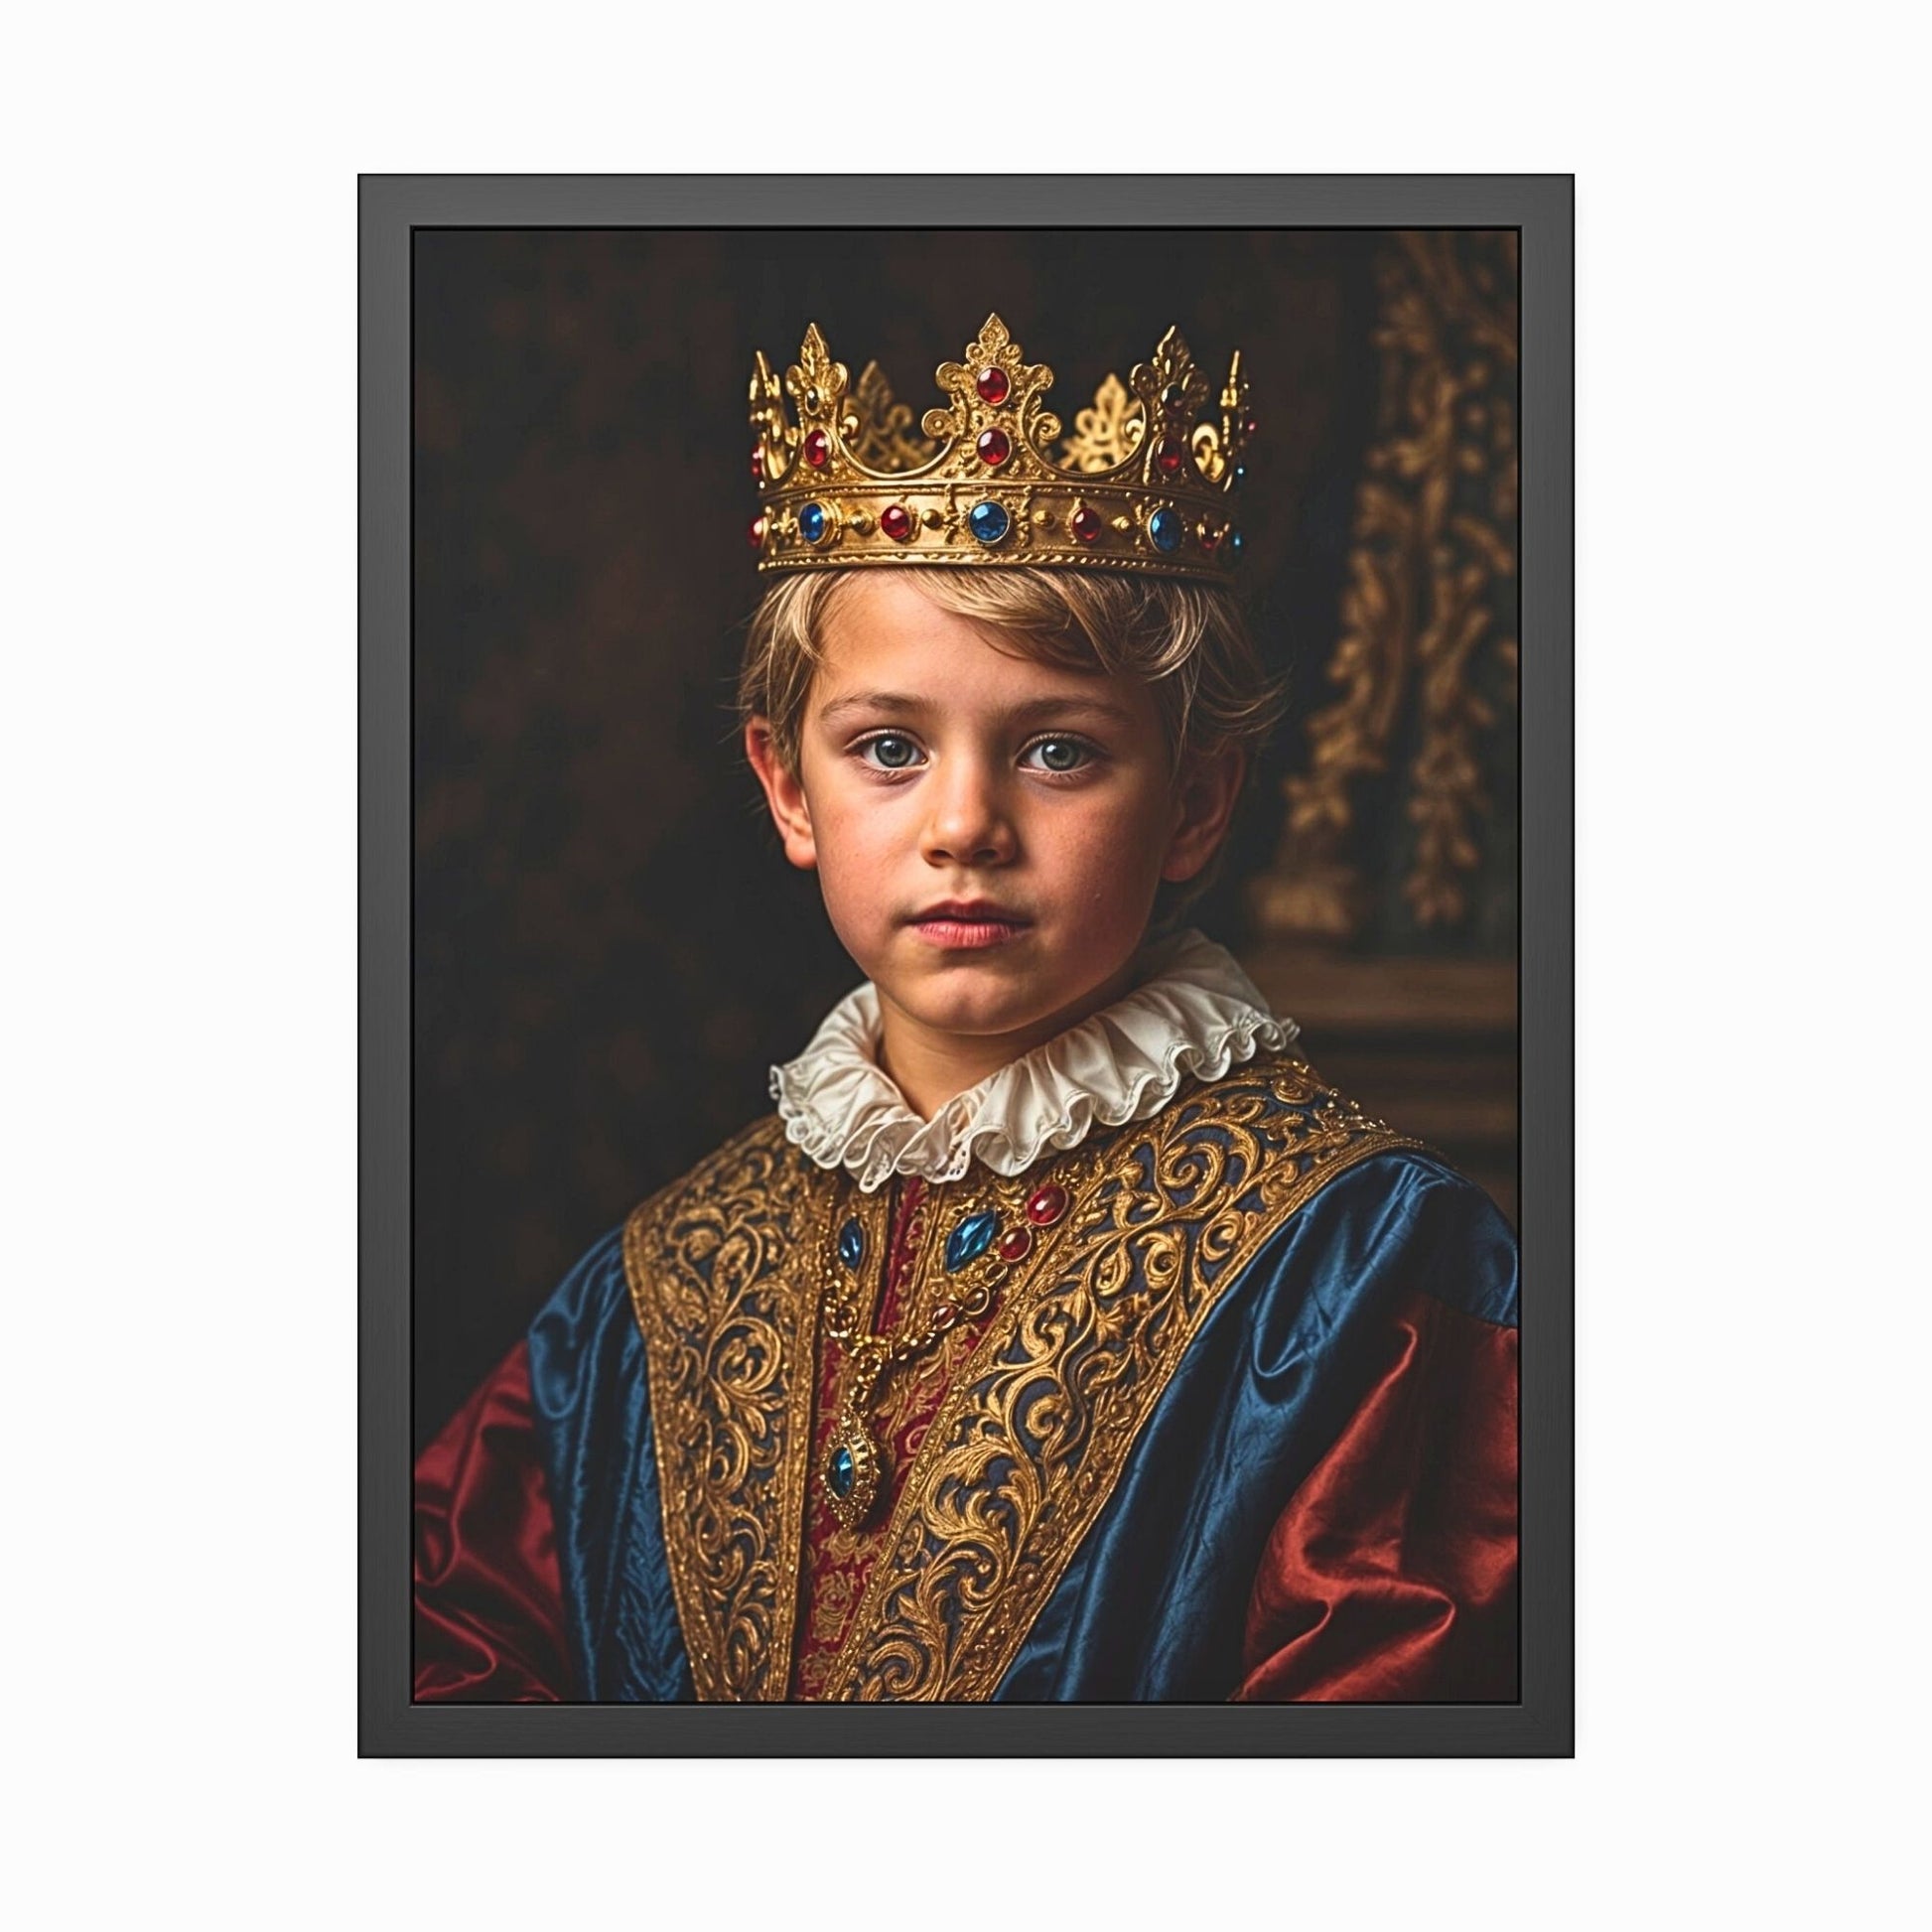 Transform your child's photo into a masterpiece with our Custom Kid Royal Portrait service. Personalized portraits of your little Prince or Princess, ideal for birthdays and memorable gifts. Experience the elegance of Renaissance-inspired artwork tailored from your photos, perfect for decorating children's rooms and celebrating special moments.